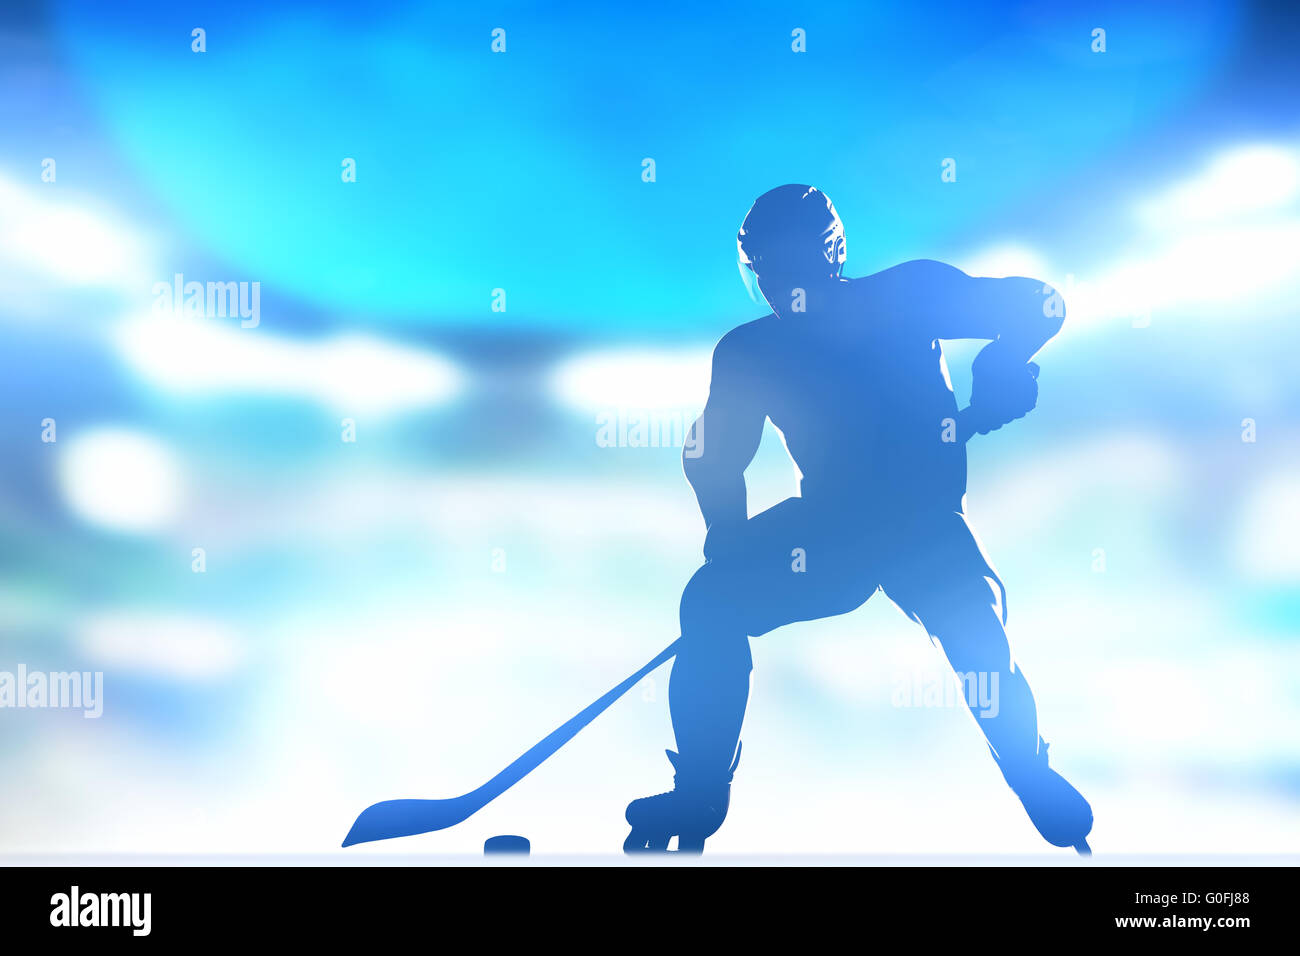 Hockey player skating with a puck. Full arena night lights Stock Photo